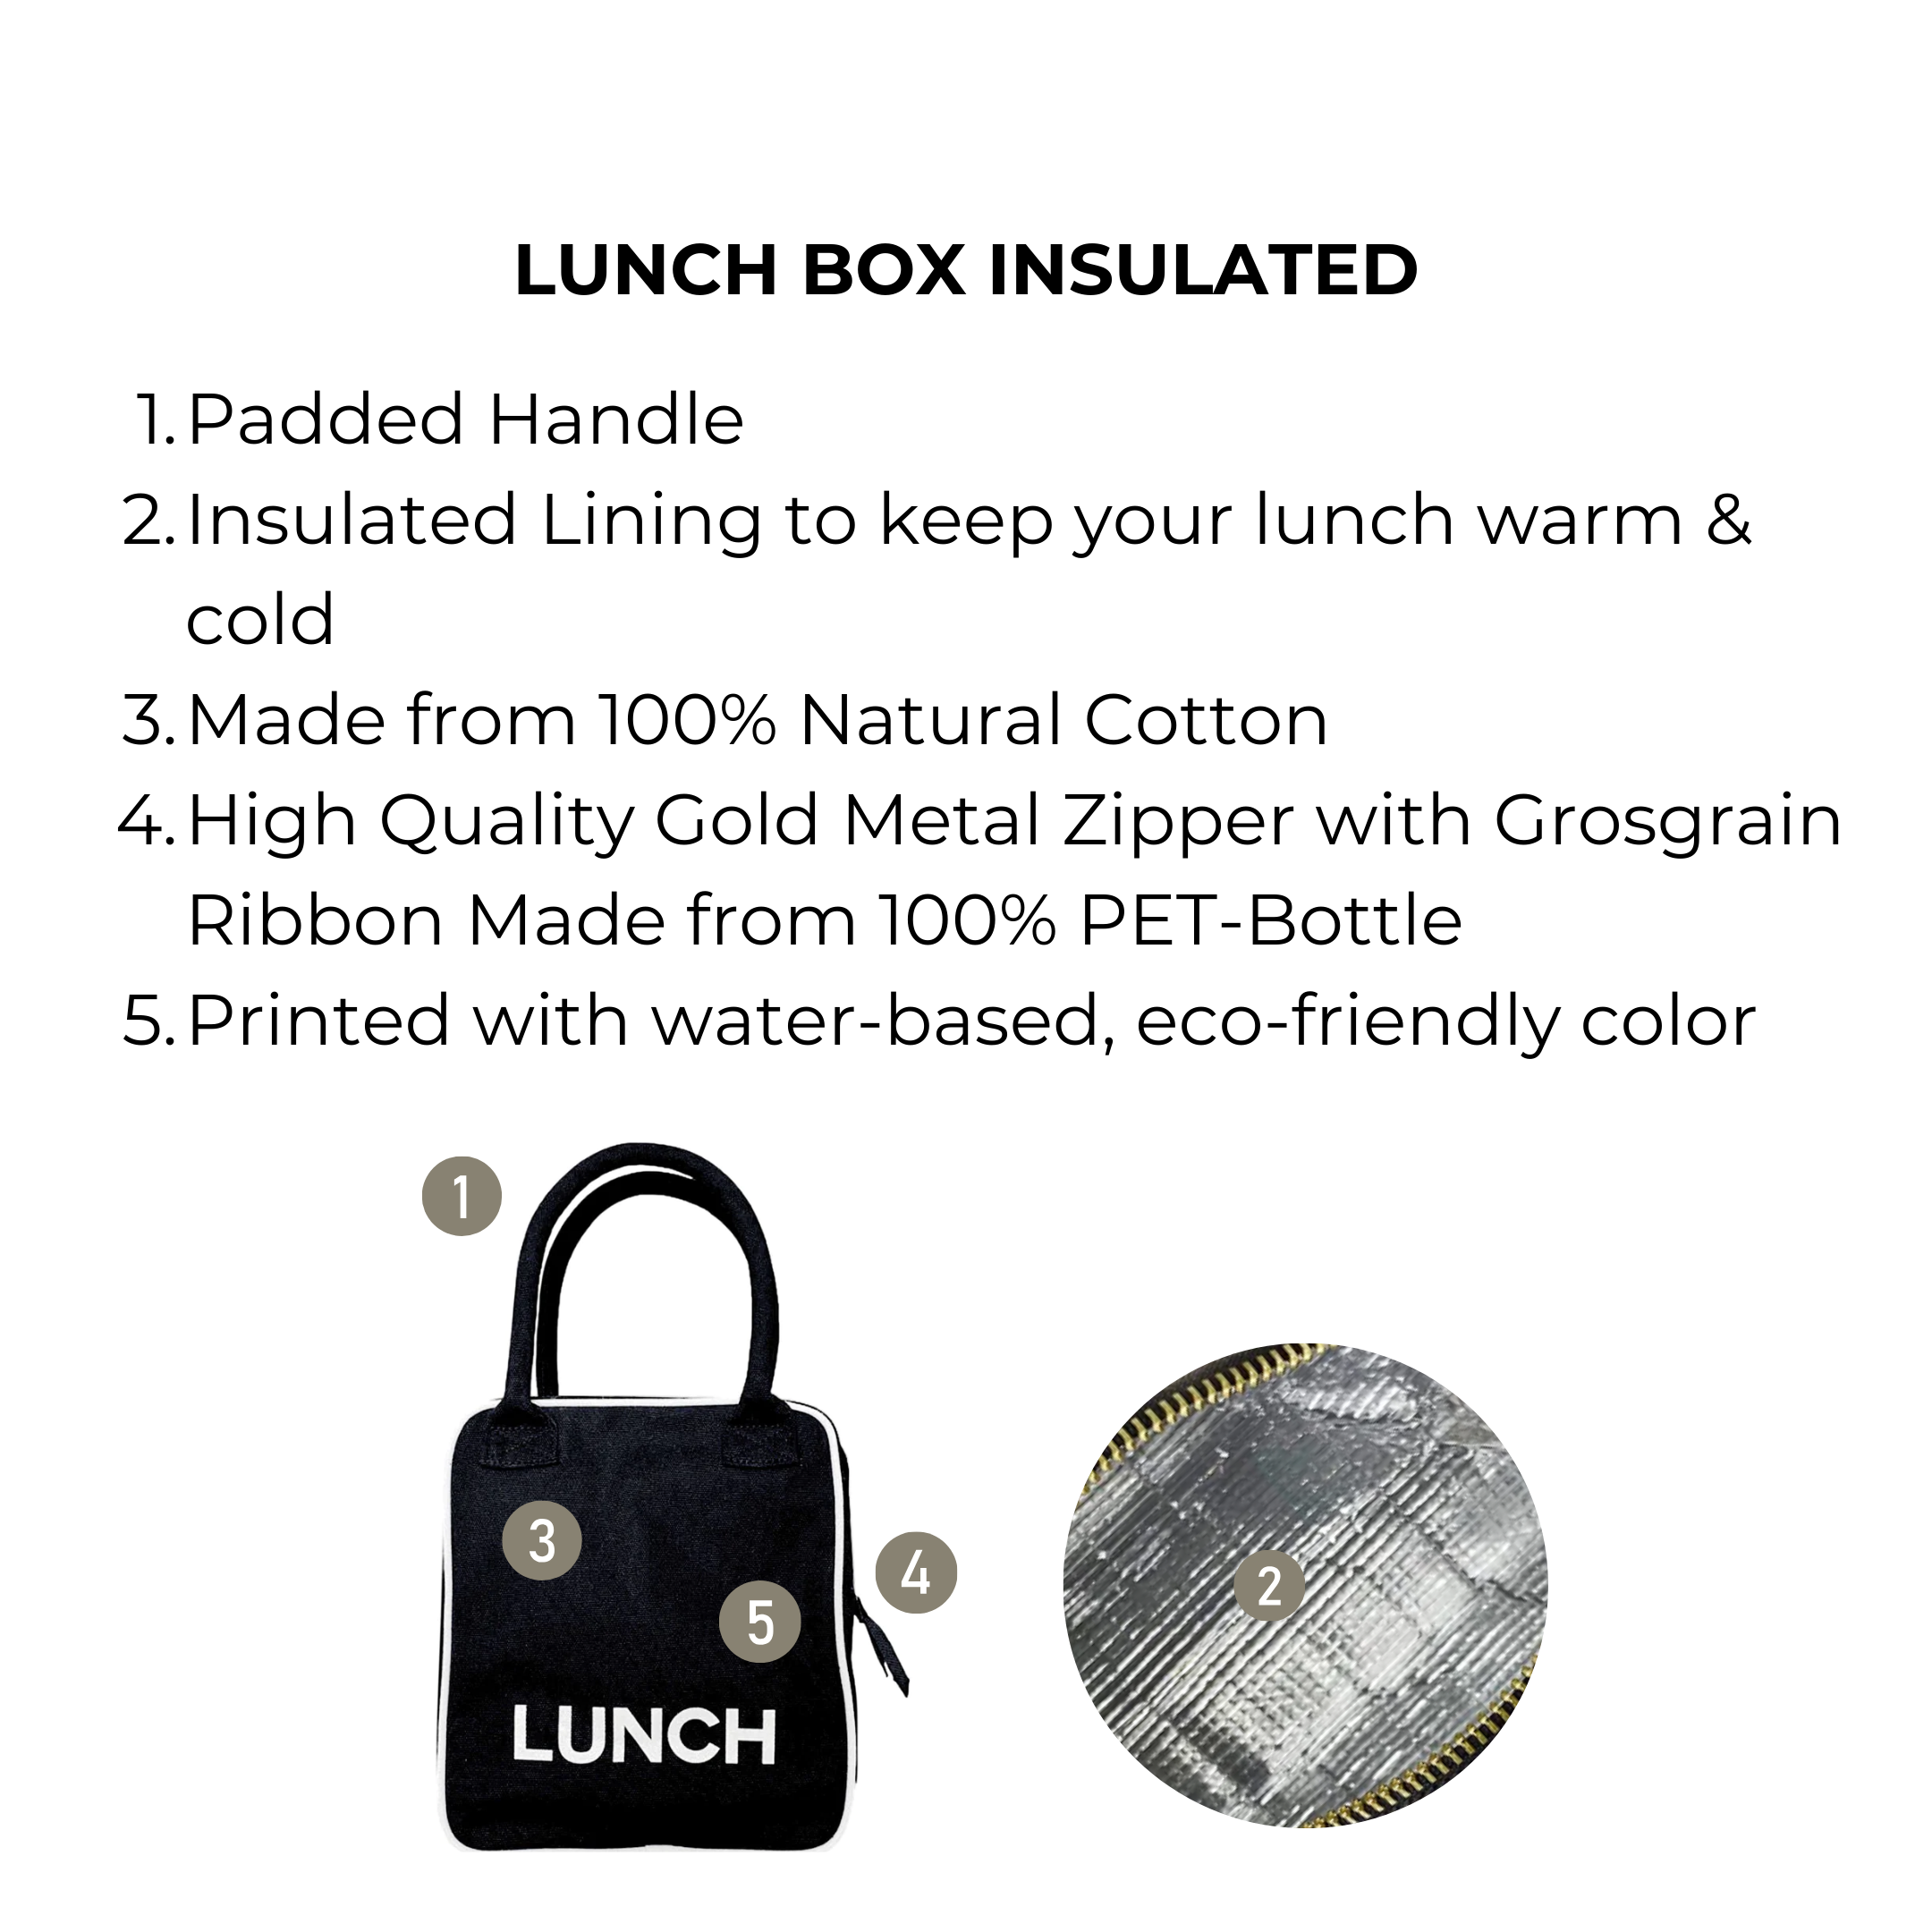 Lunch Box Insulated, Black | Bag-all